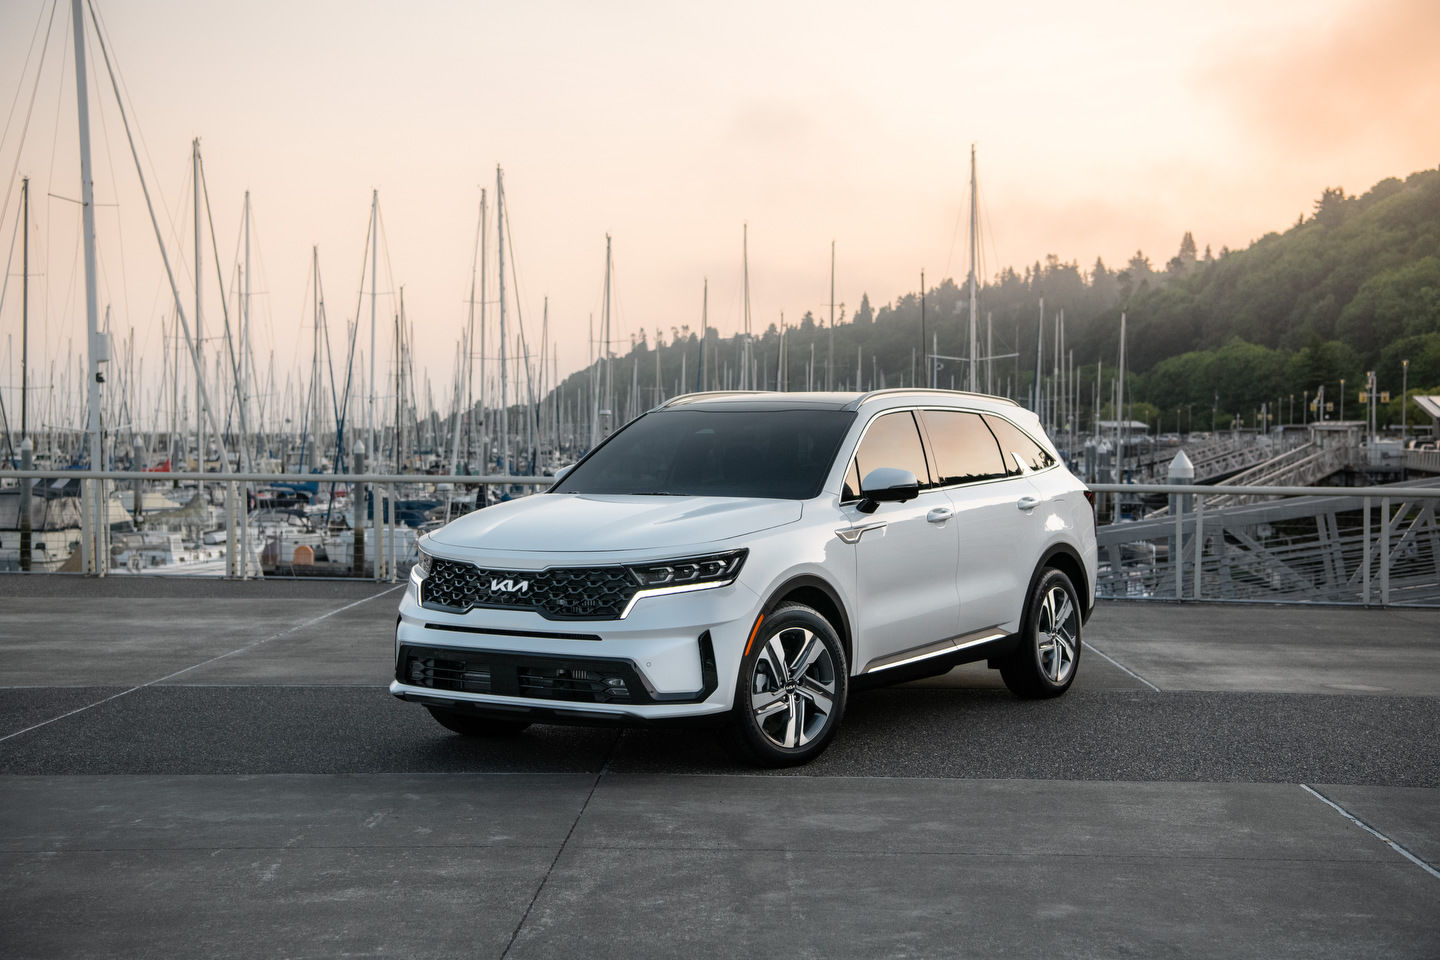 A look at the lineup of Kia sport utility vehicles available in 2022